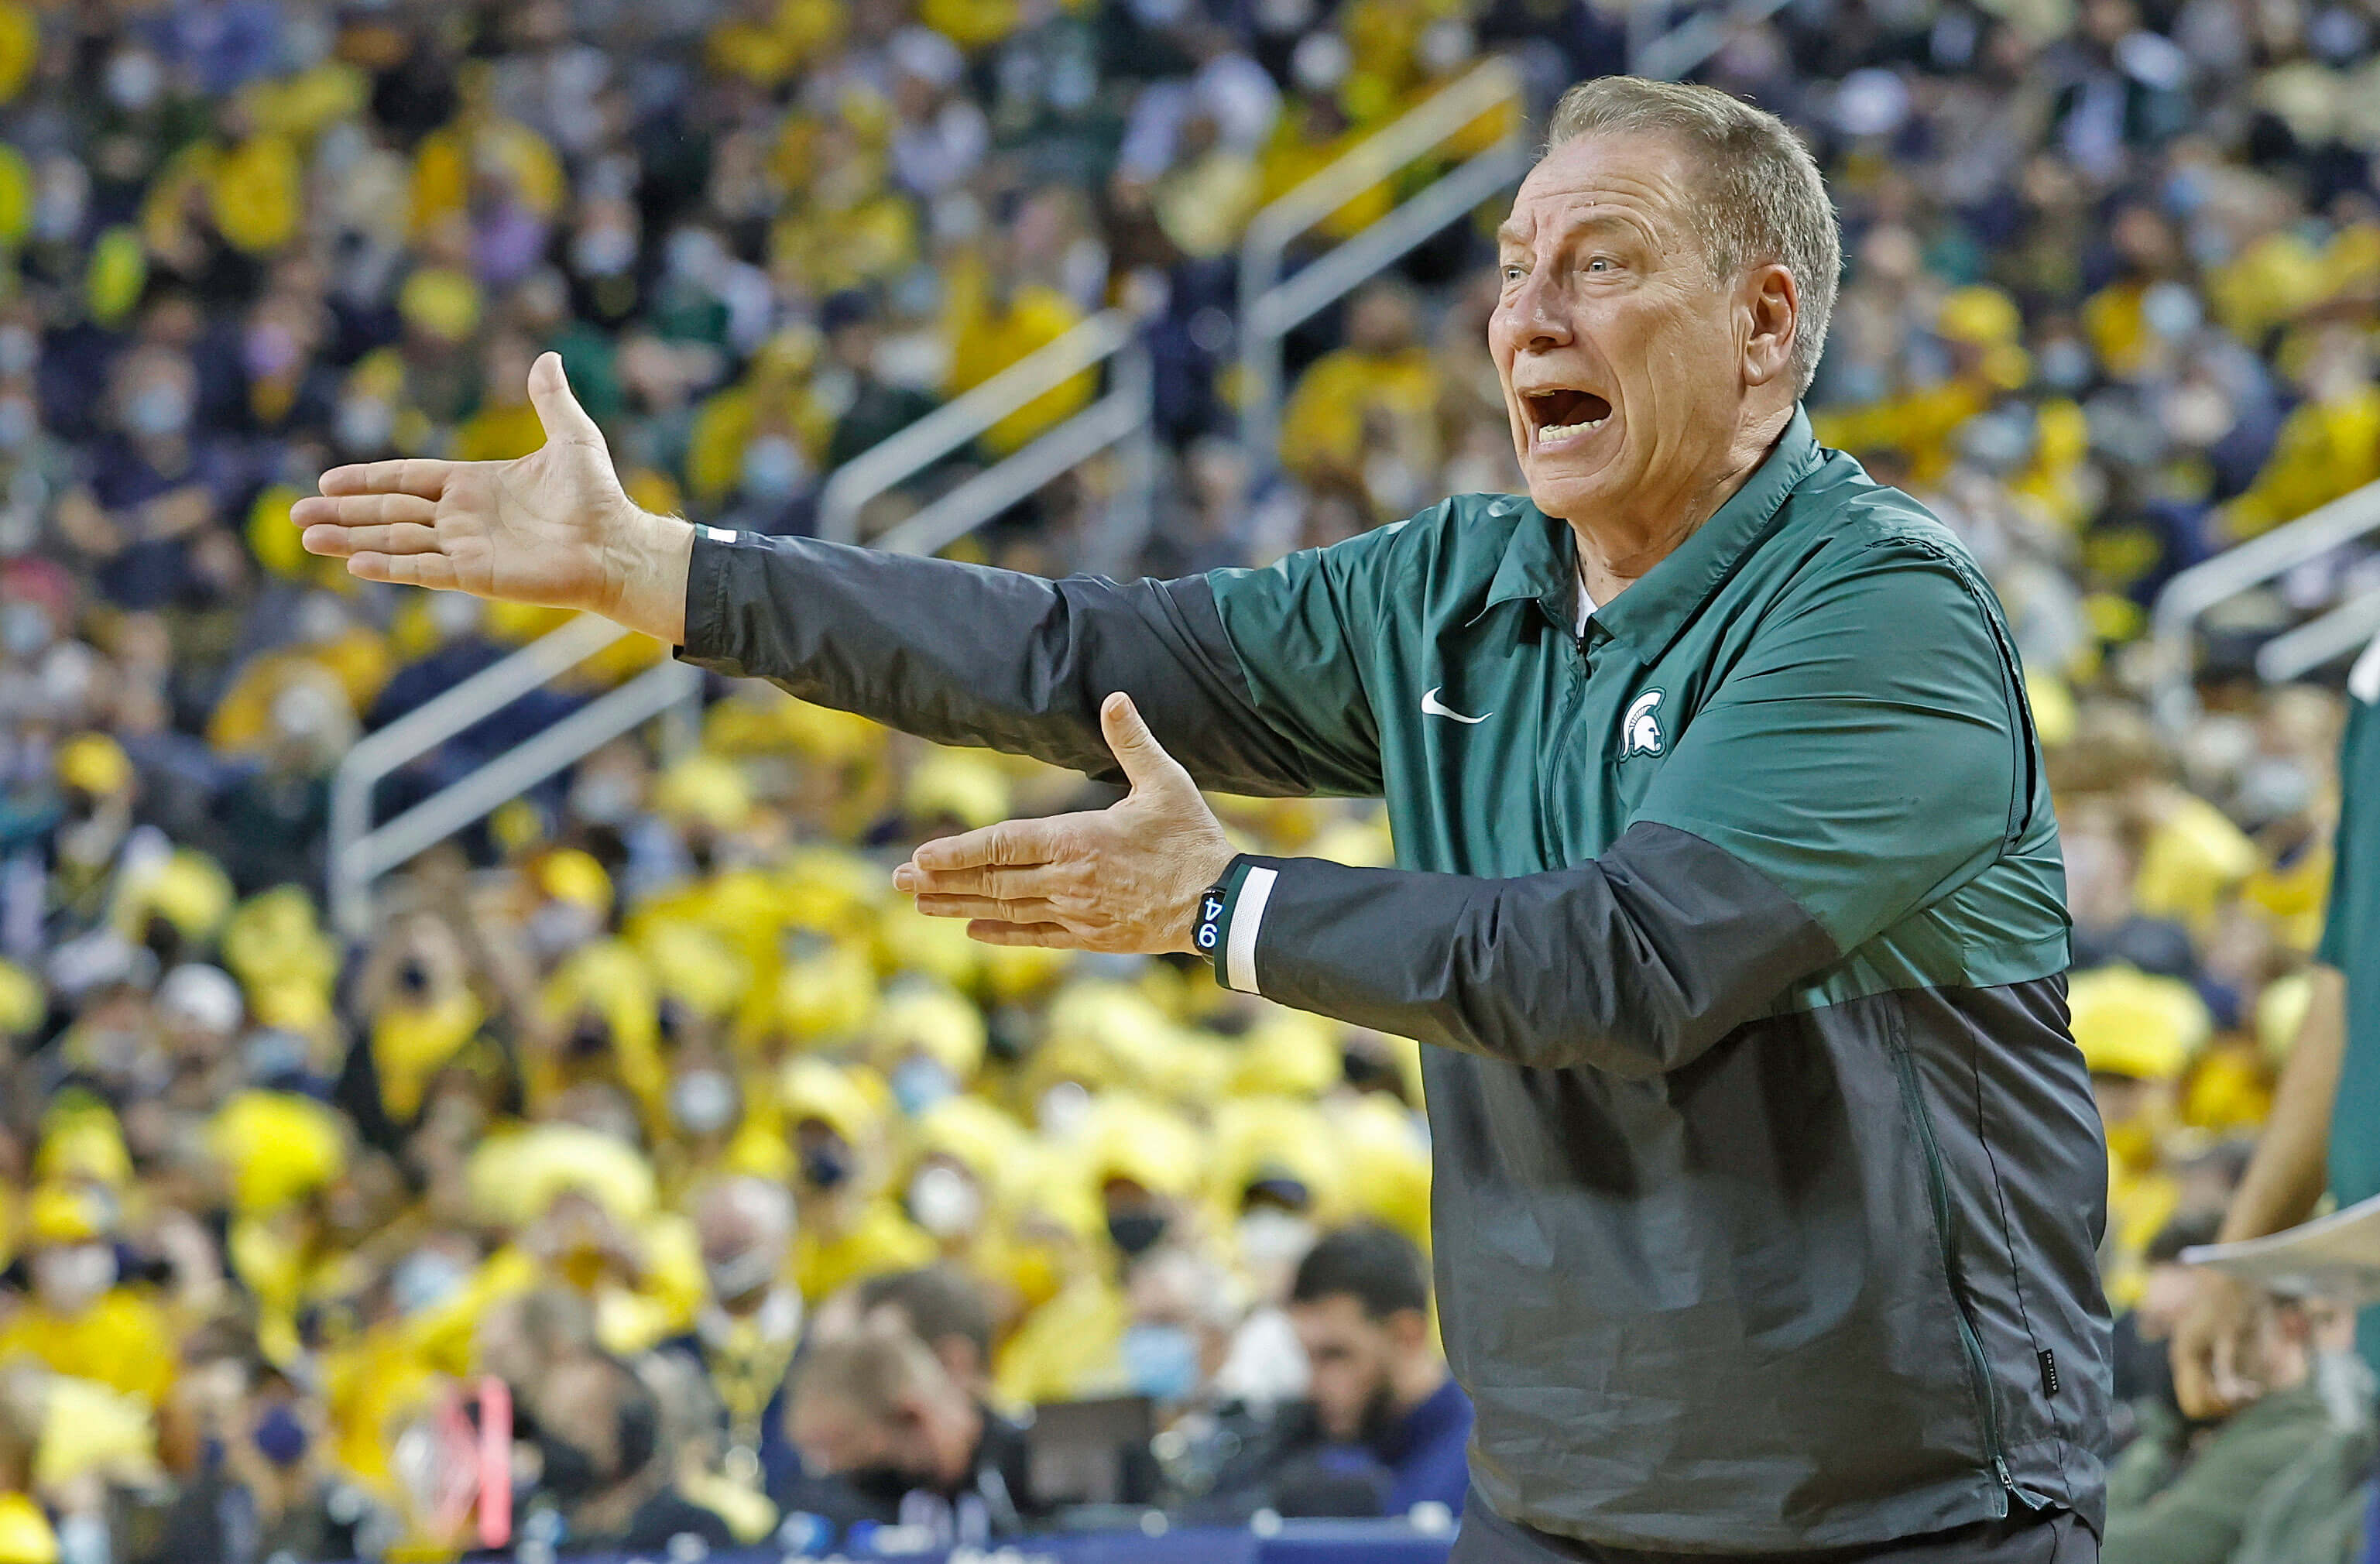 Michigan State vs Ohio State Picks and Predictions: Offensive Struggles Continue For Both Teams